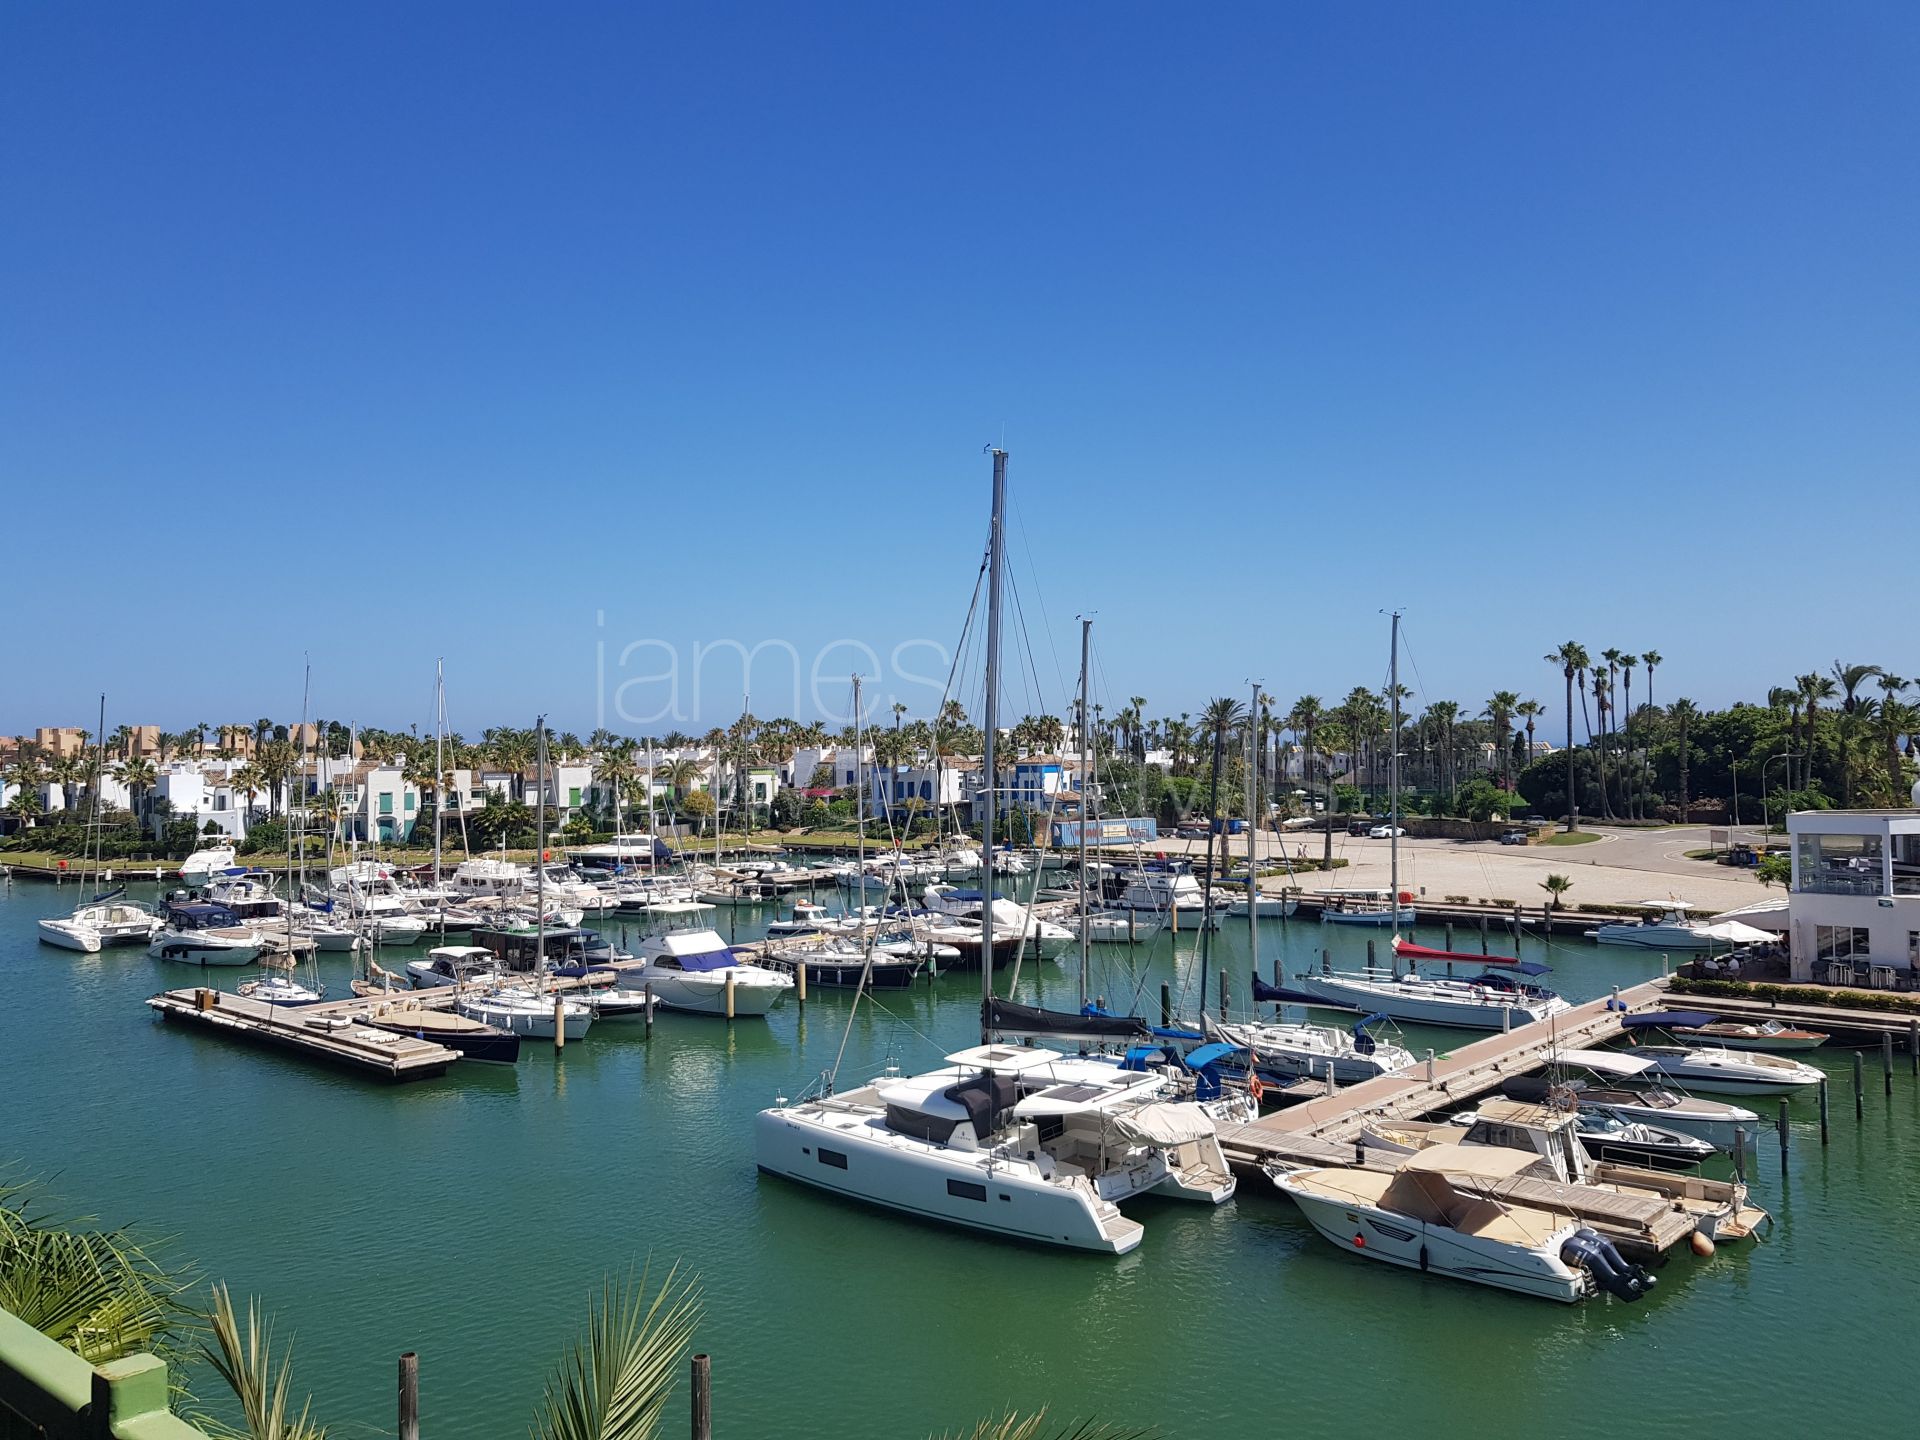 South-east facing 3 bedroom apartment with lovely elevated Marina views